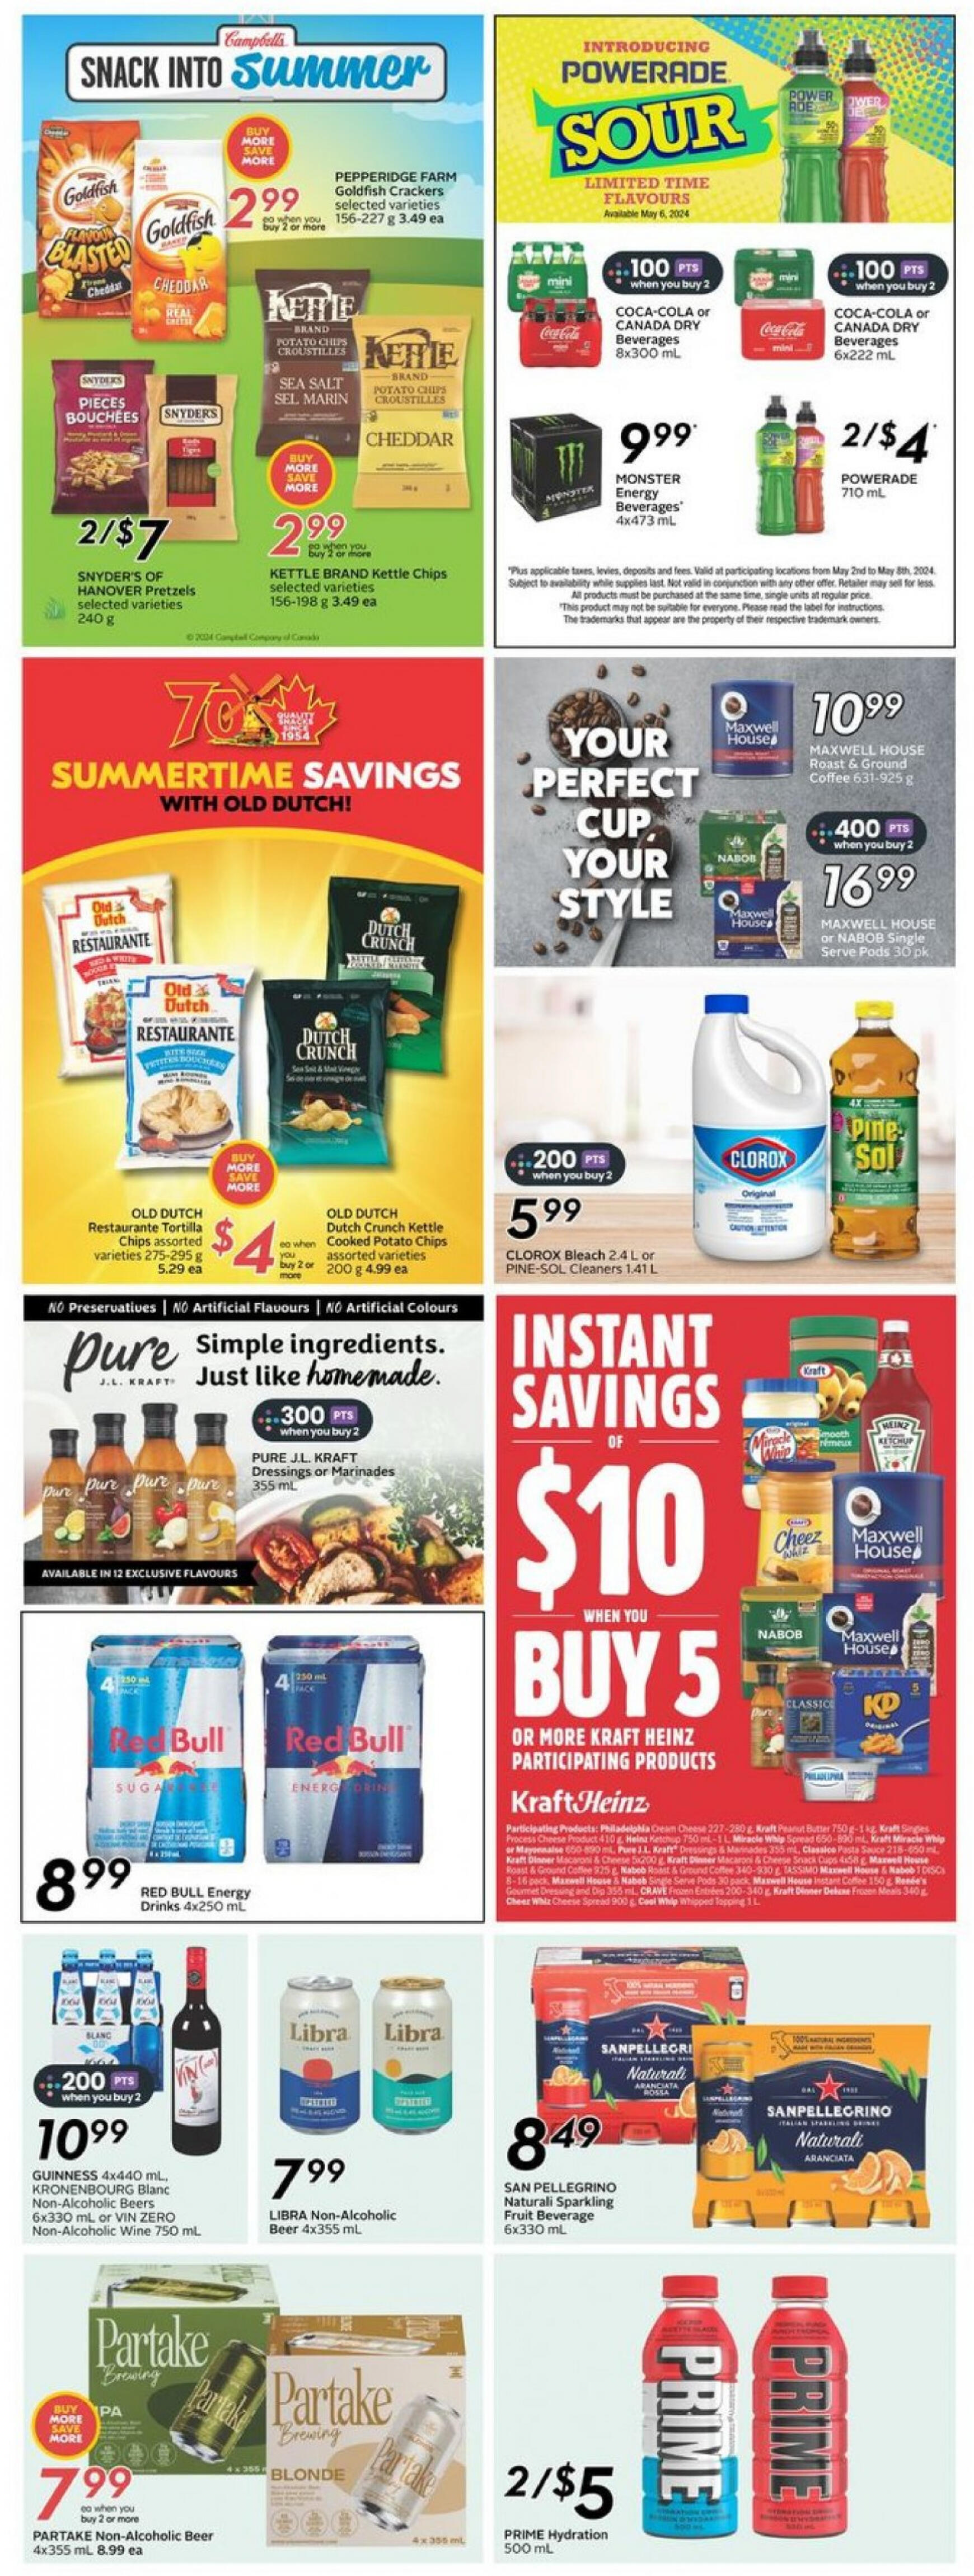 sobeys - Sobeys - Weekly Flyer - Ontario flyer current 02.05. - 08.05. - page: 21